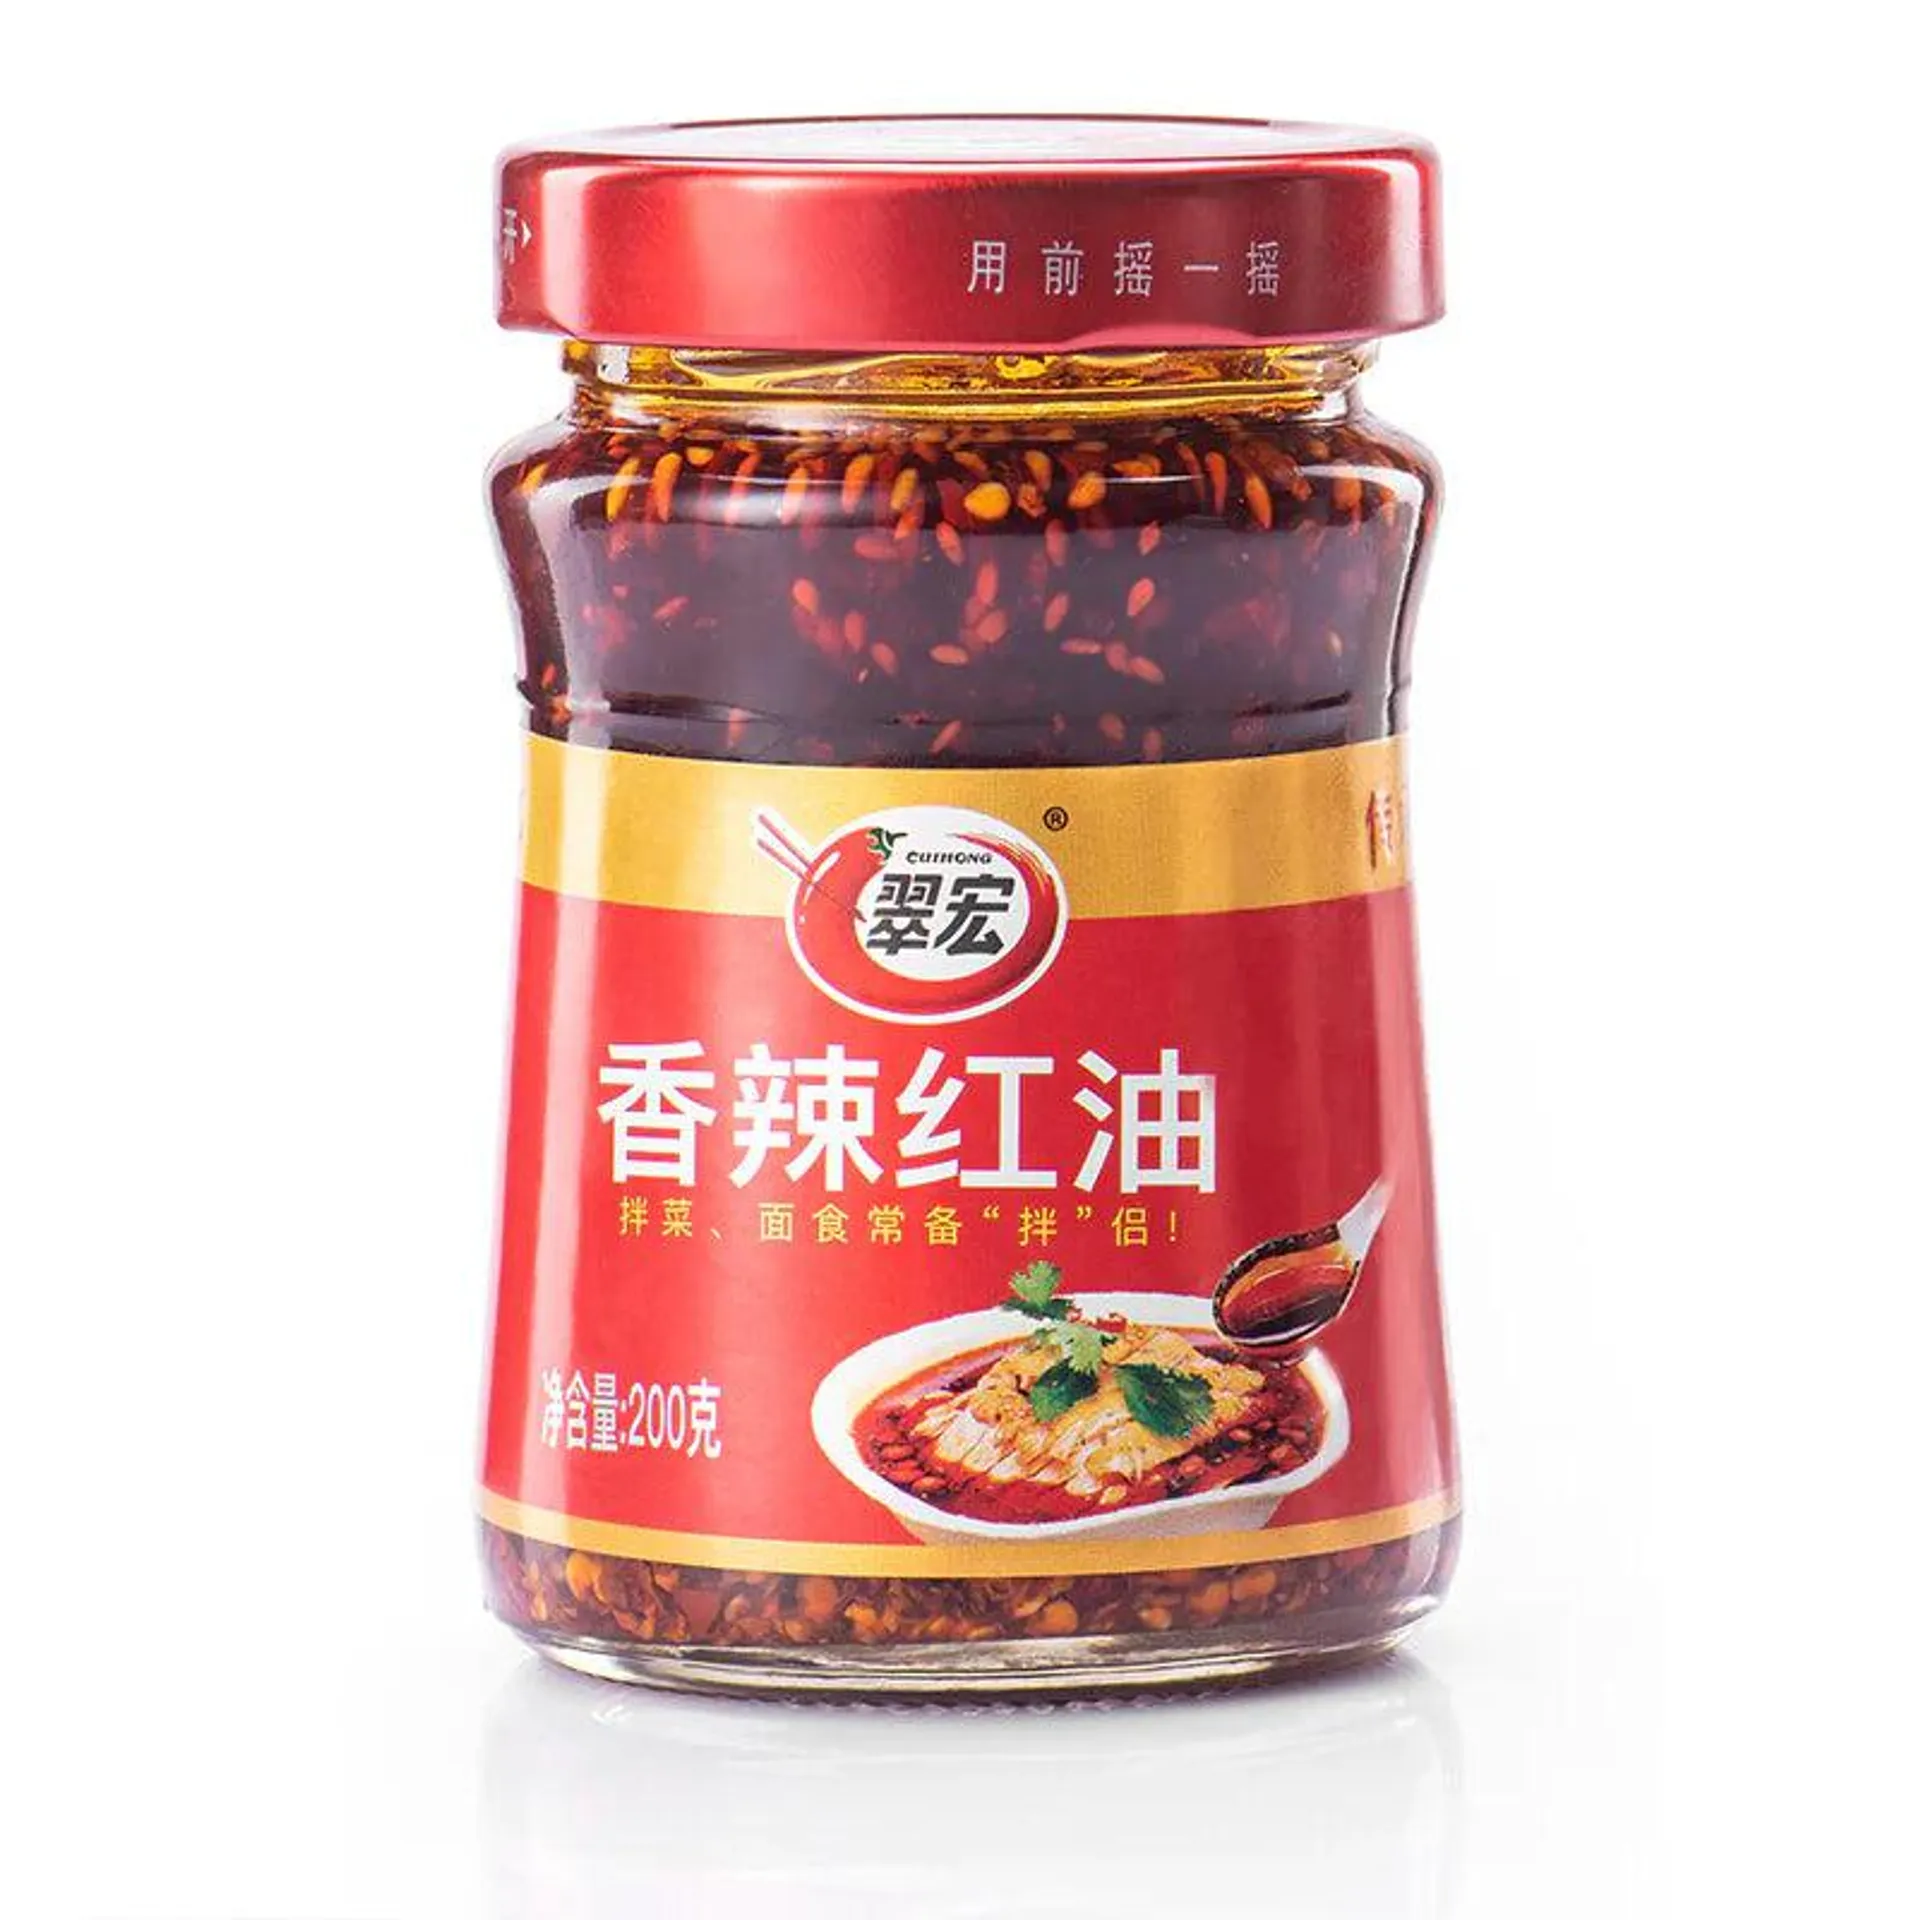 Cui Hong · Spicy Red Chili Oil (200g)